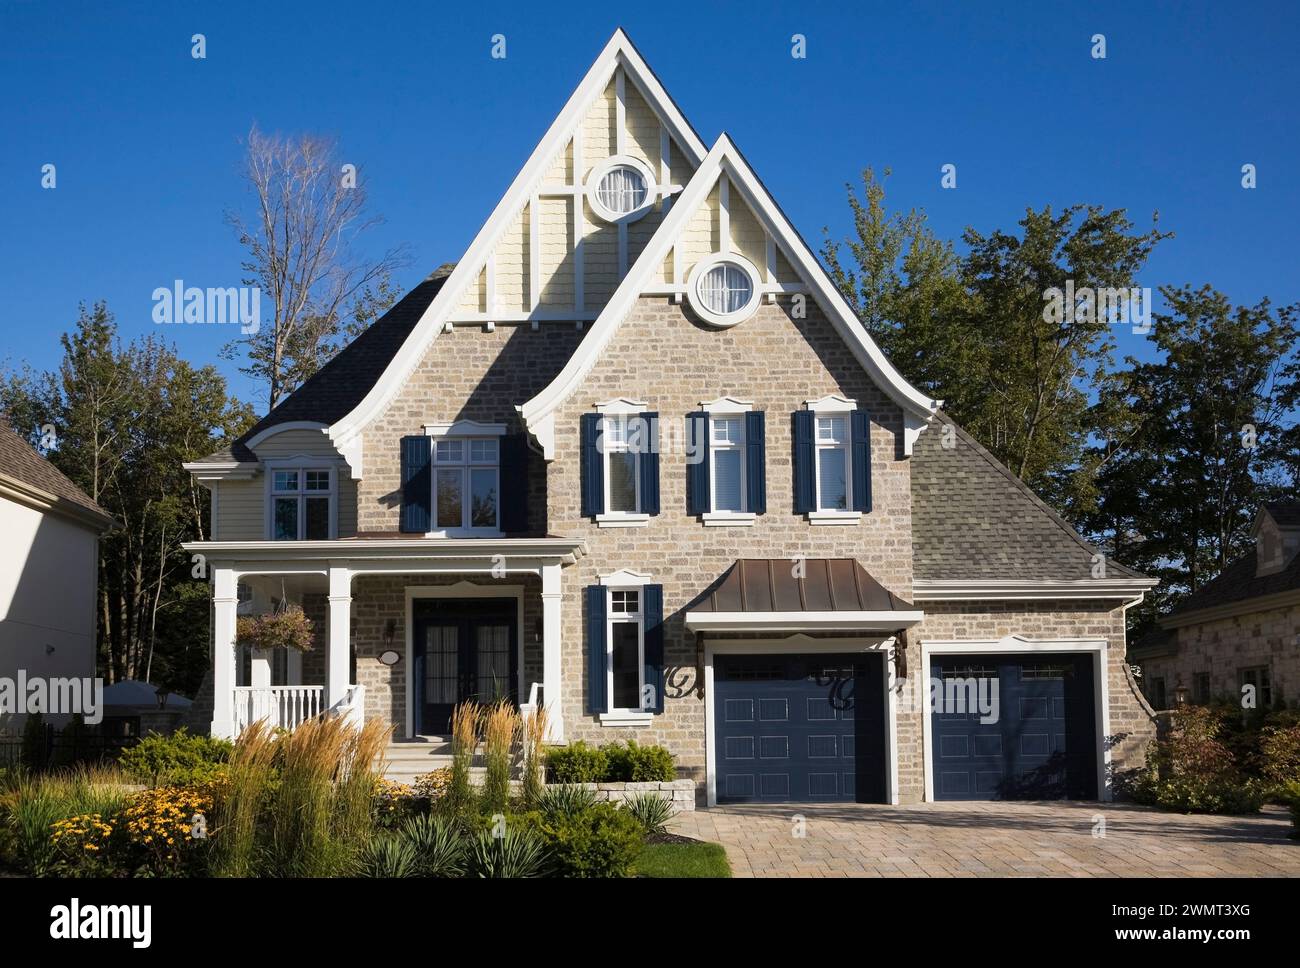 Luxurious Victorian style light brown and tan cut stone home with blue trim, two car garage, landscaped front yard and paving stone driveway in summer. Stock Photo